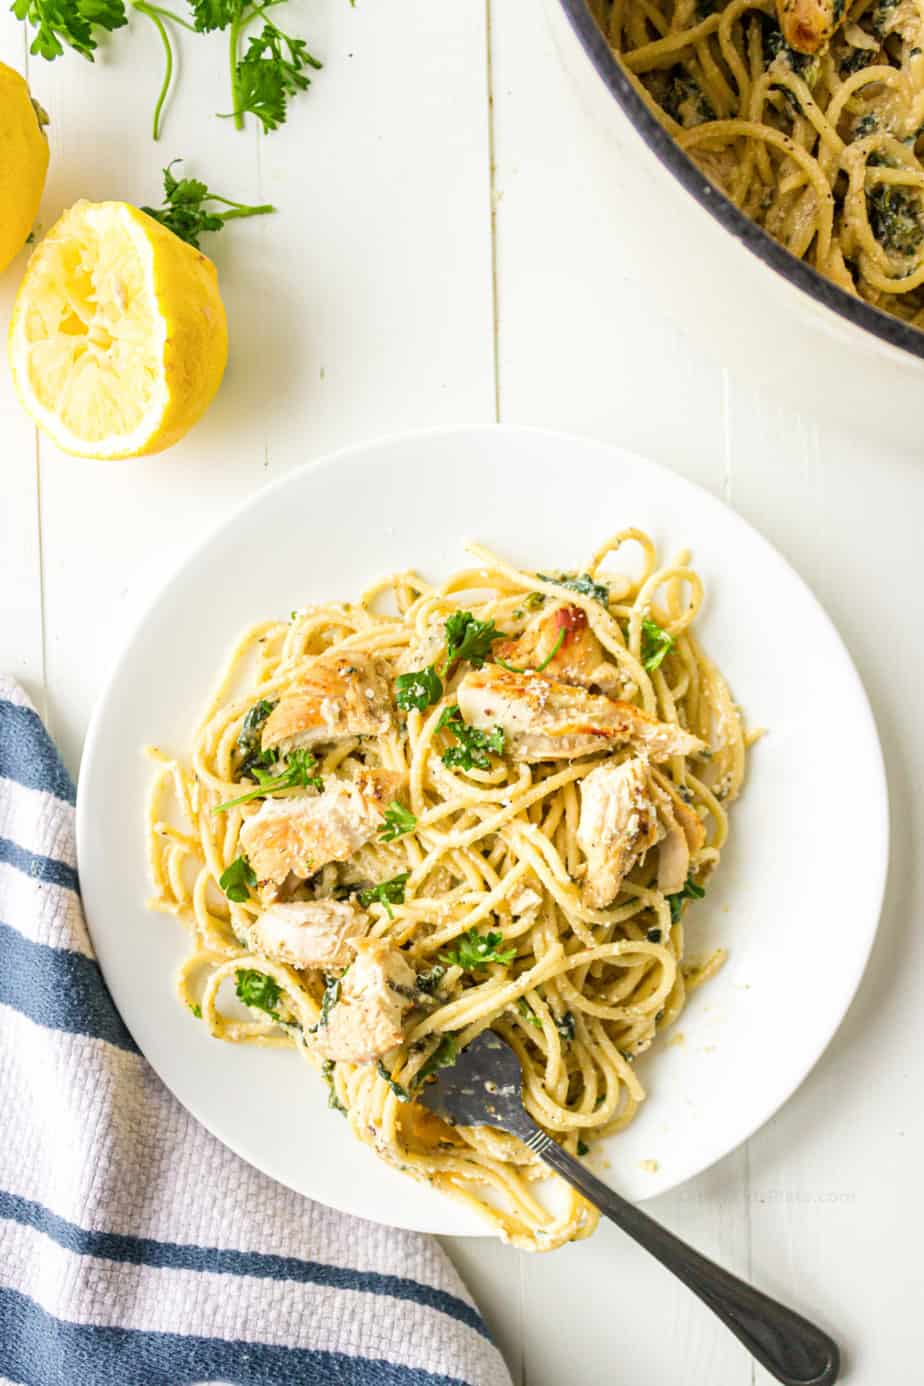 Spagehtti with chicken, lemon and herbs in a creamy sauce on a plate.